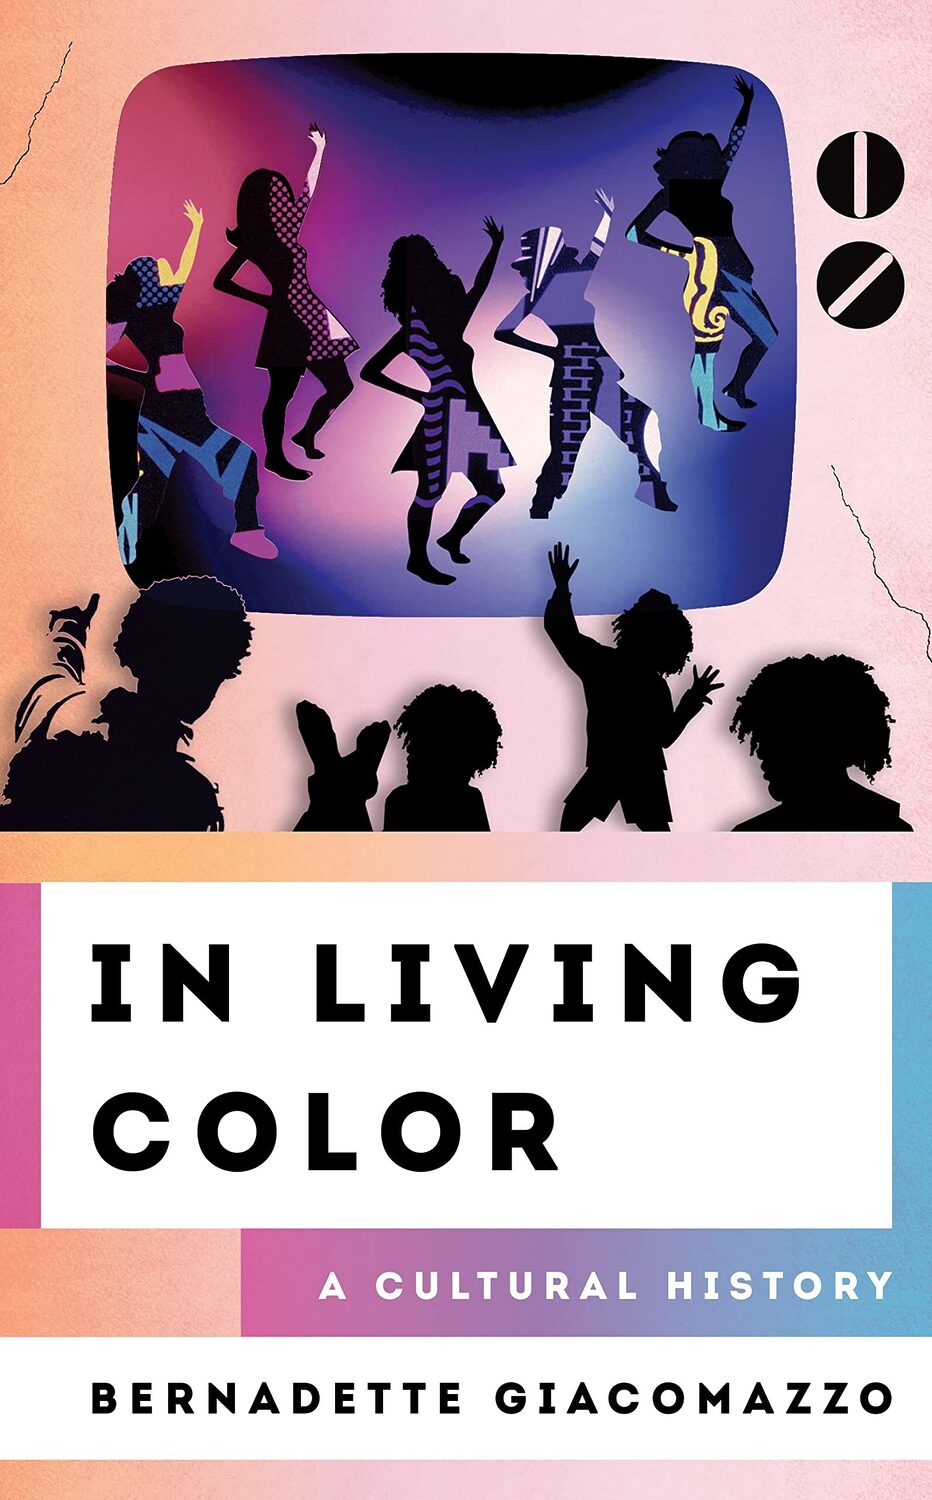 'IN LIVING COLOR: A Cultural History', by Bernadette Giacomazzo